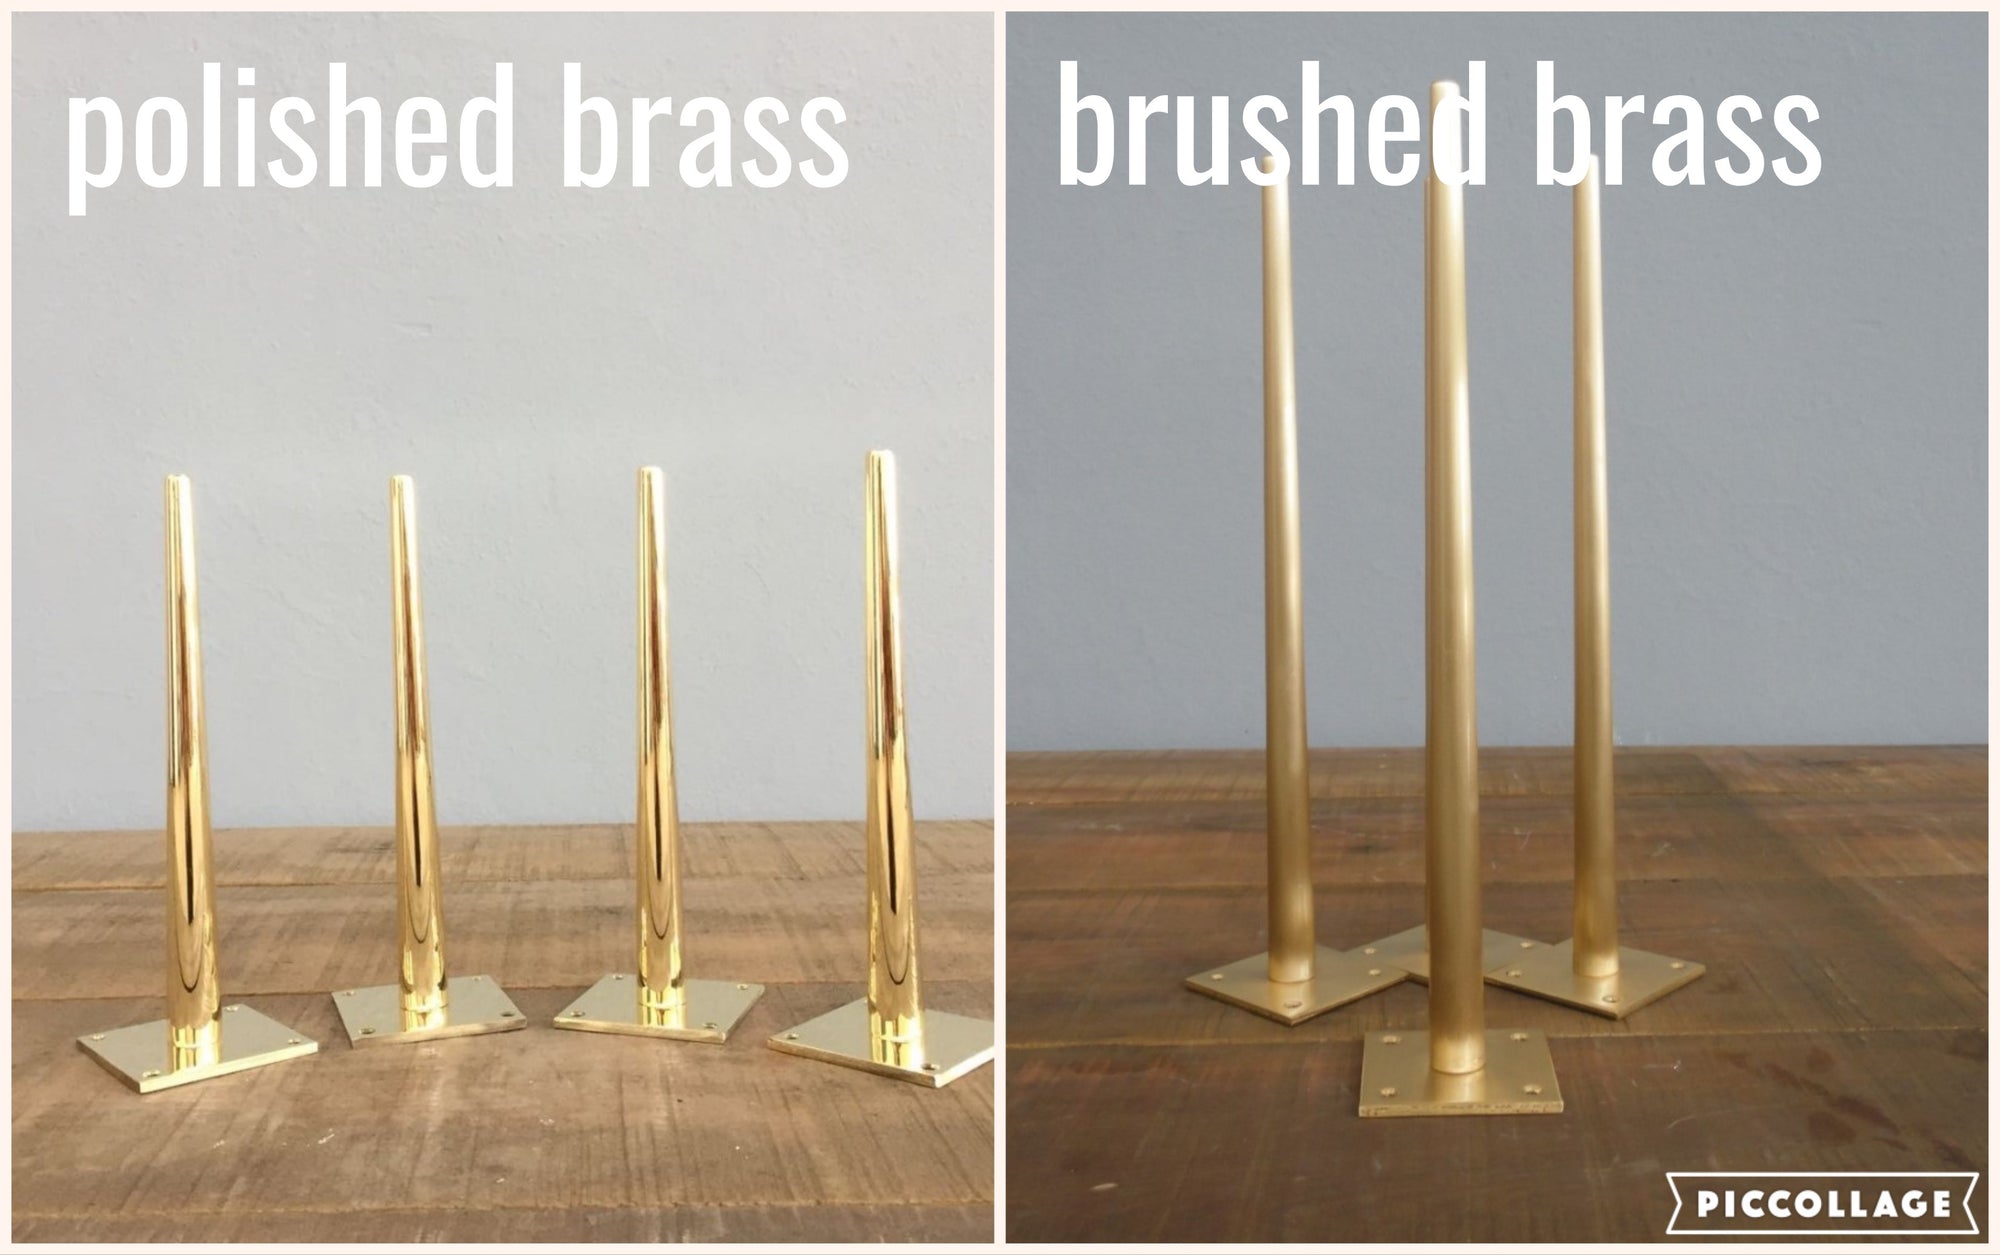 16" Tapered Brass Bitlis Table Legs Height ( 12''-16'')